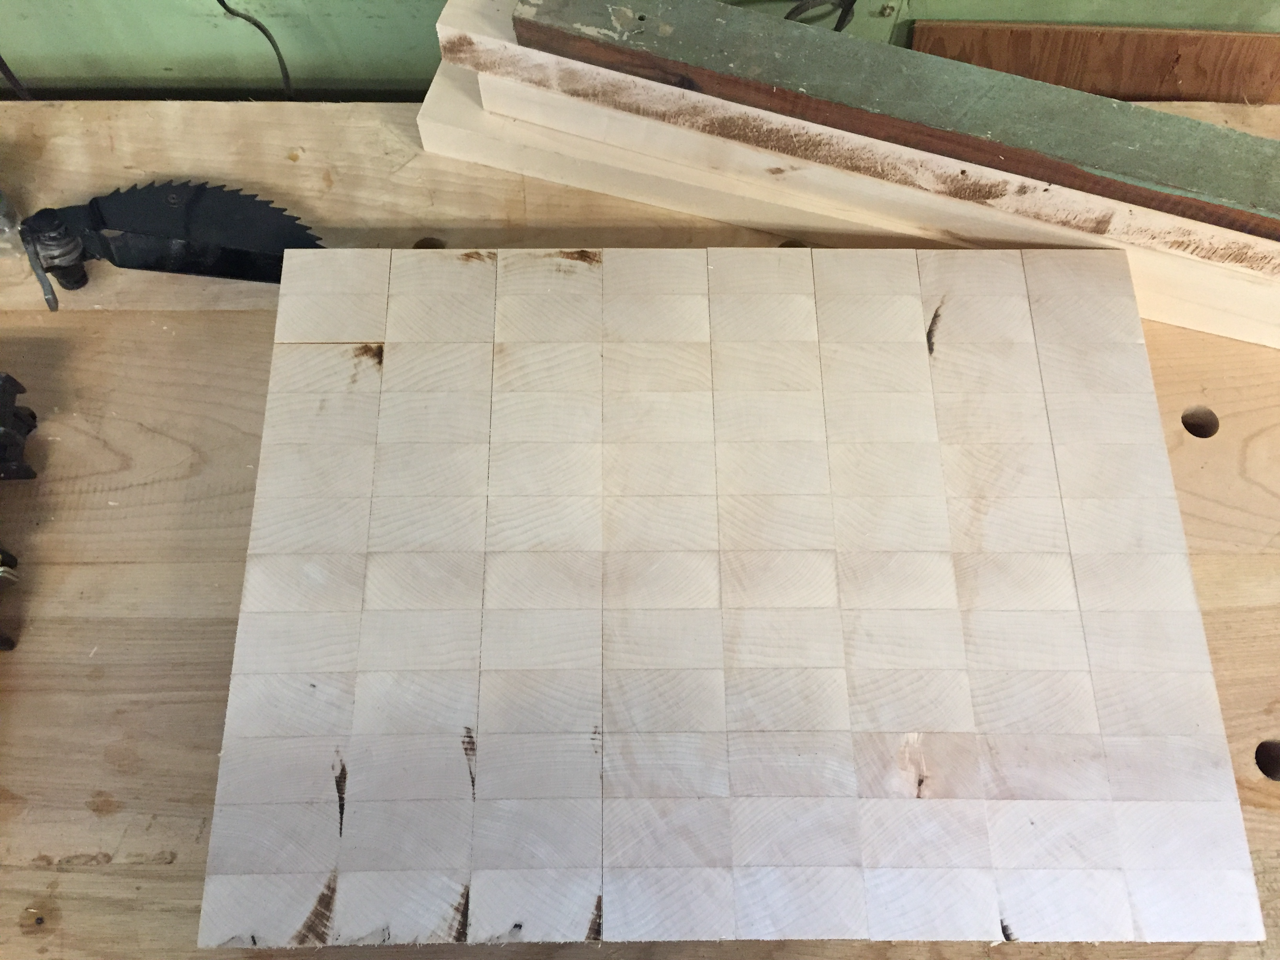 Cutting Board Build - Reoriented